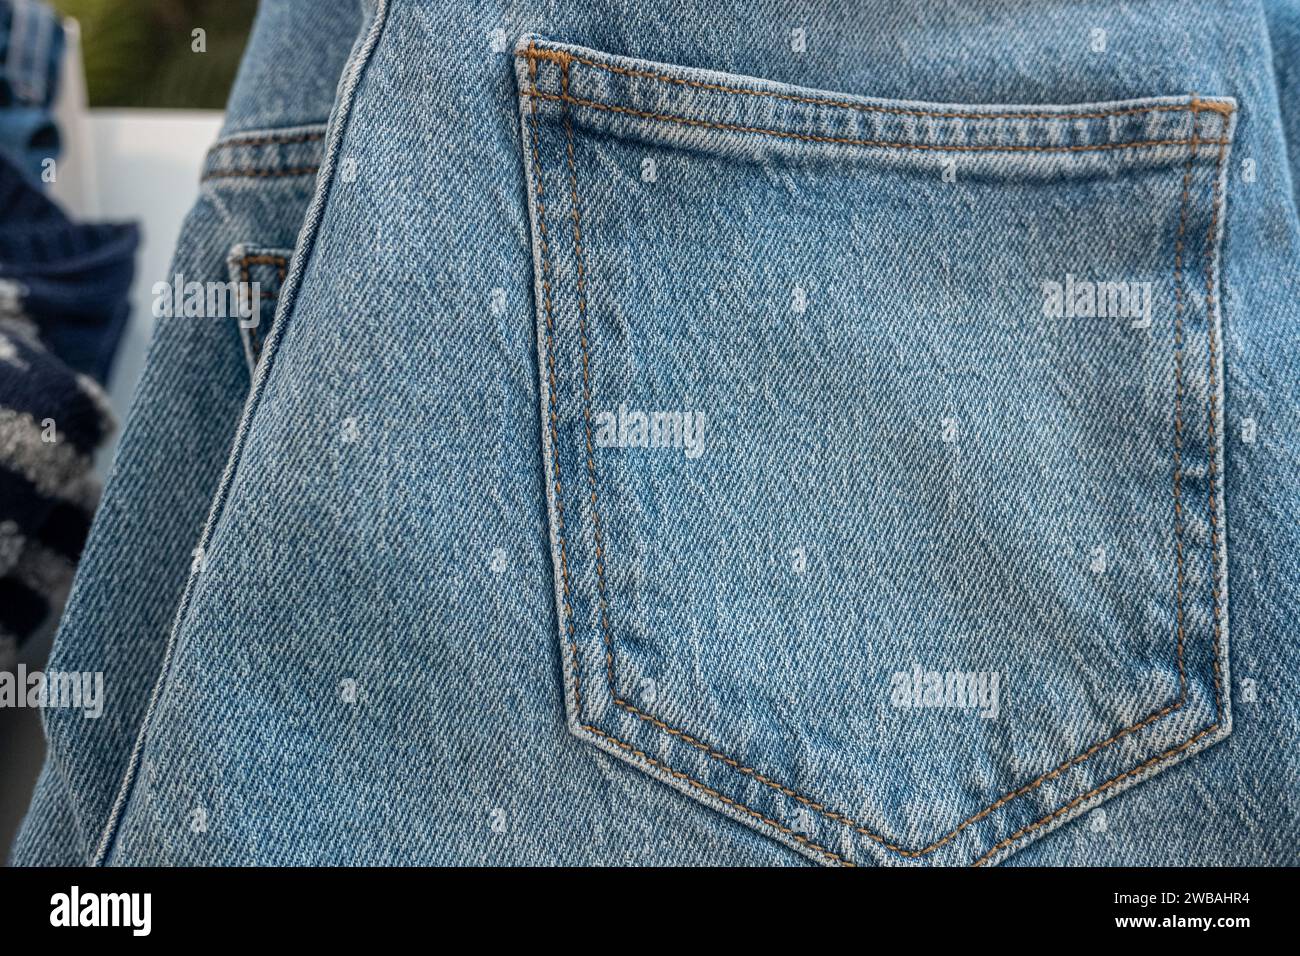 back pocket of a pair of jeans at a clothing store, clothes concept Stock Photo